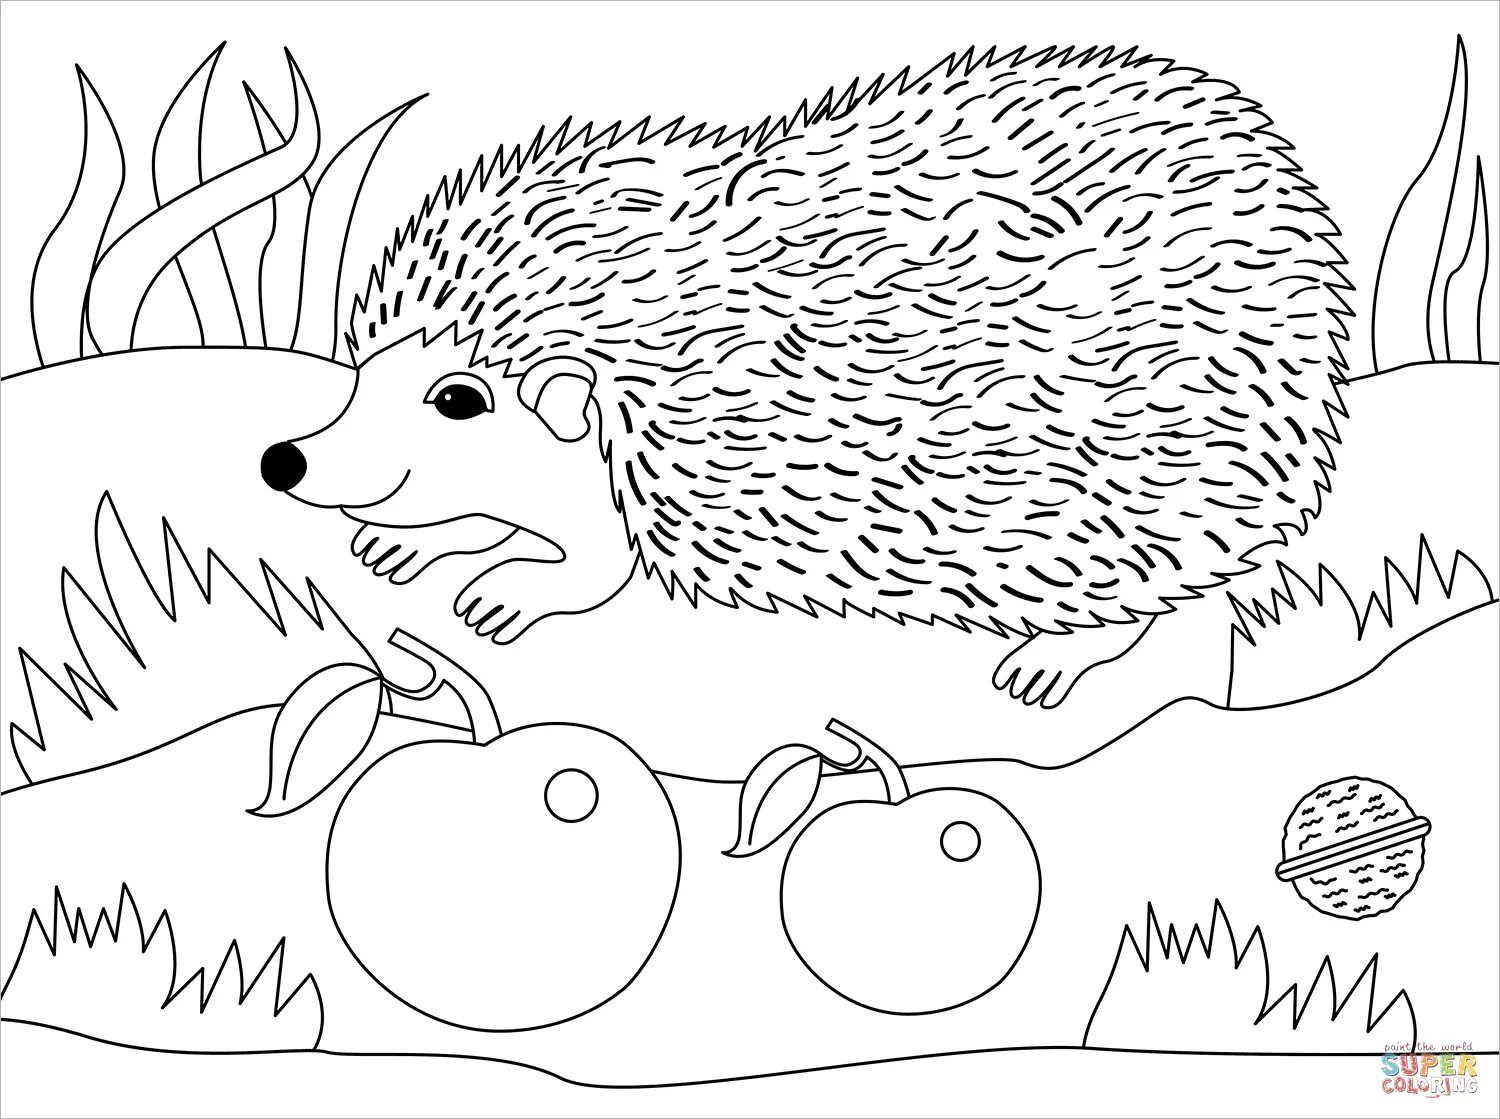 A charming hedgehog in the forest